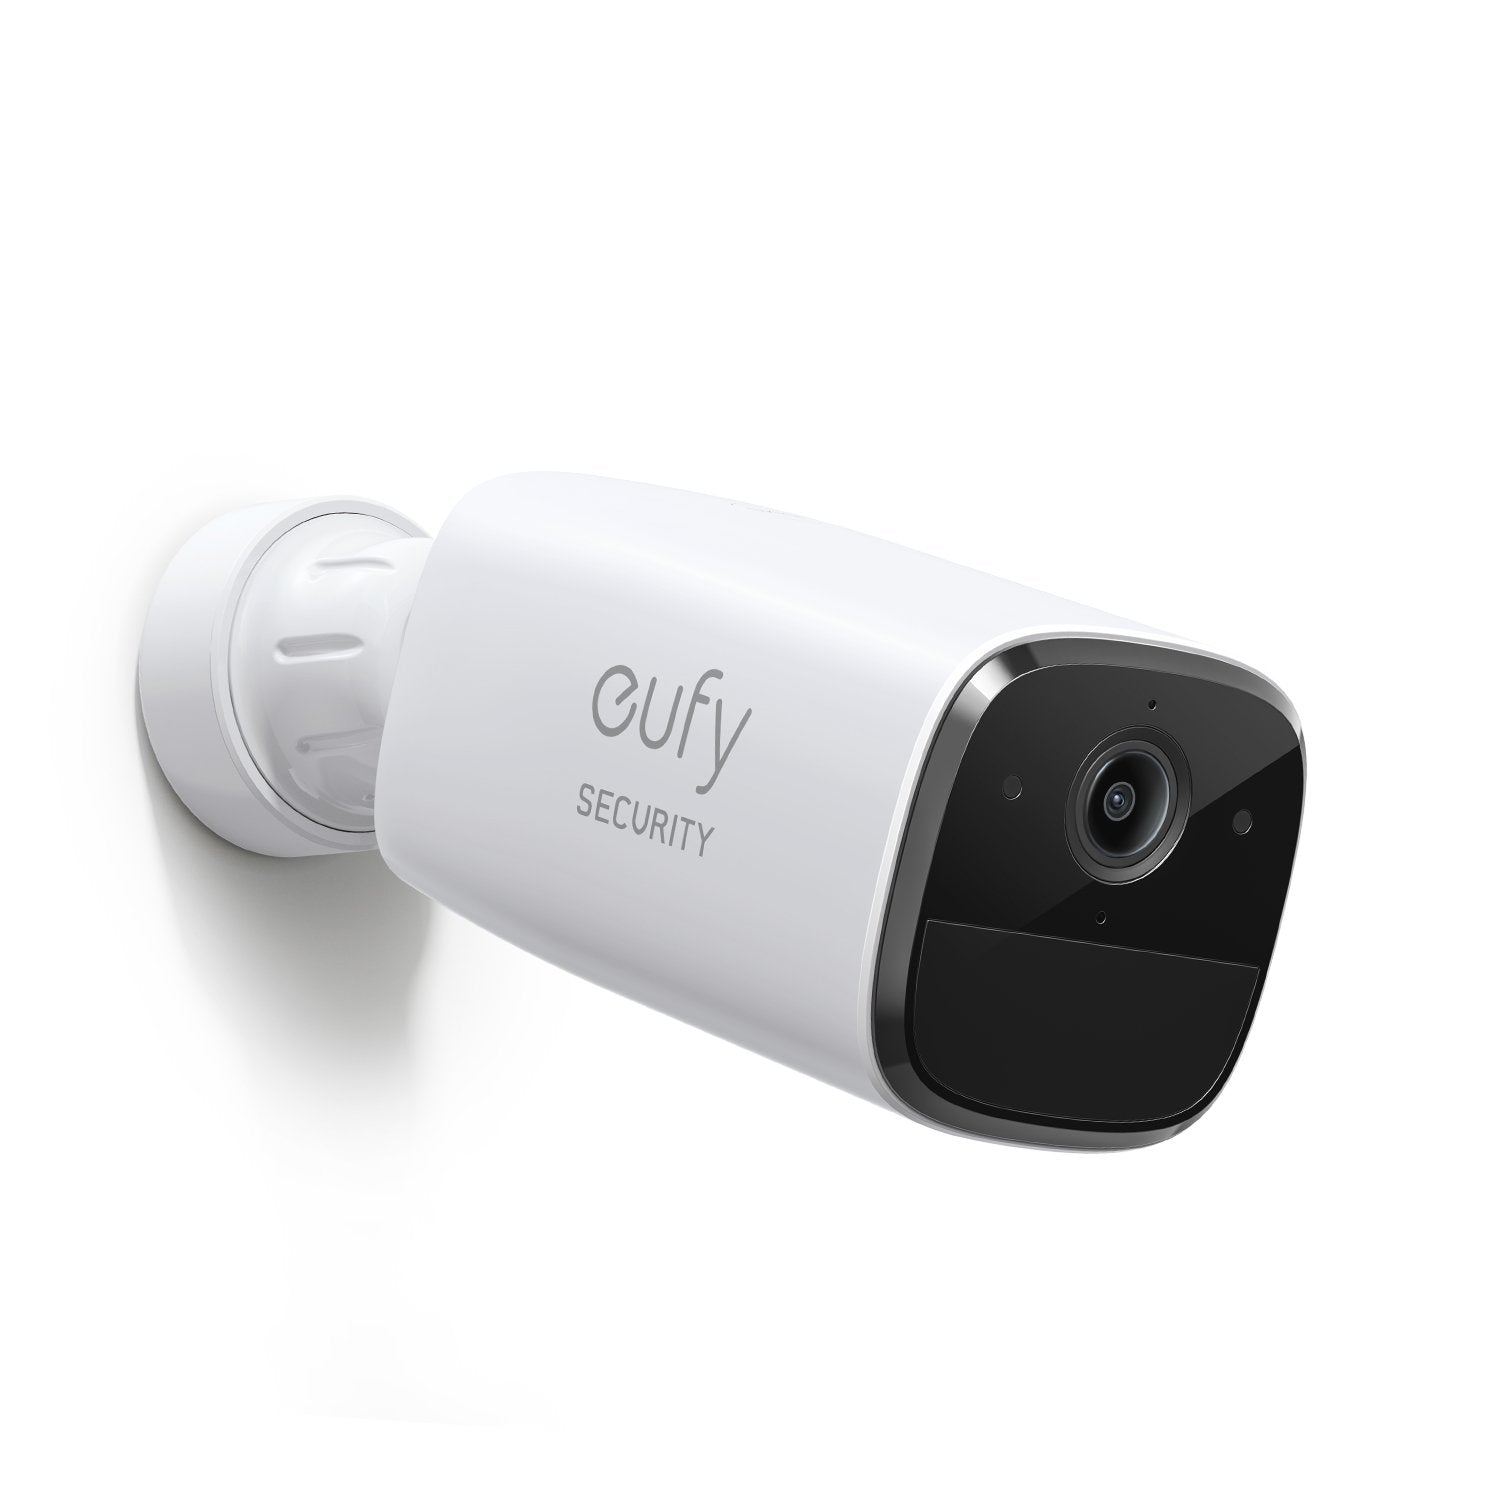 Best Selling Shopify Products on de.eufy.com-2